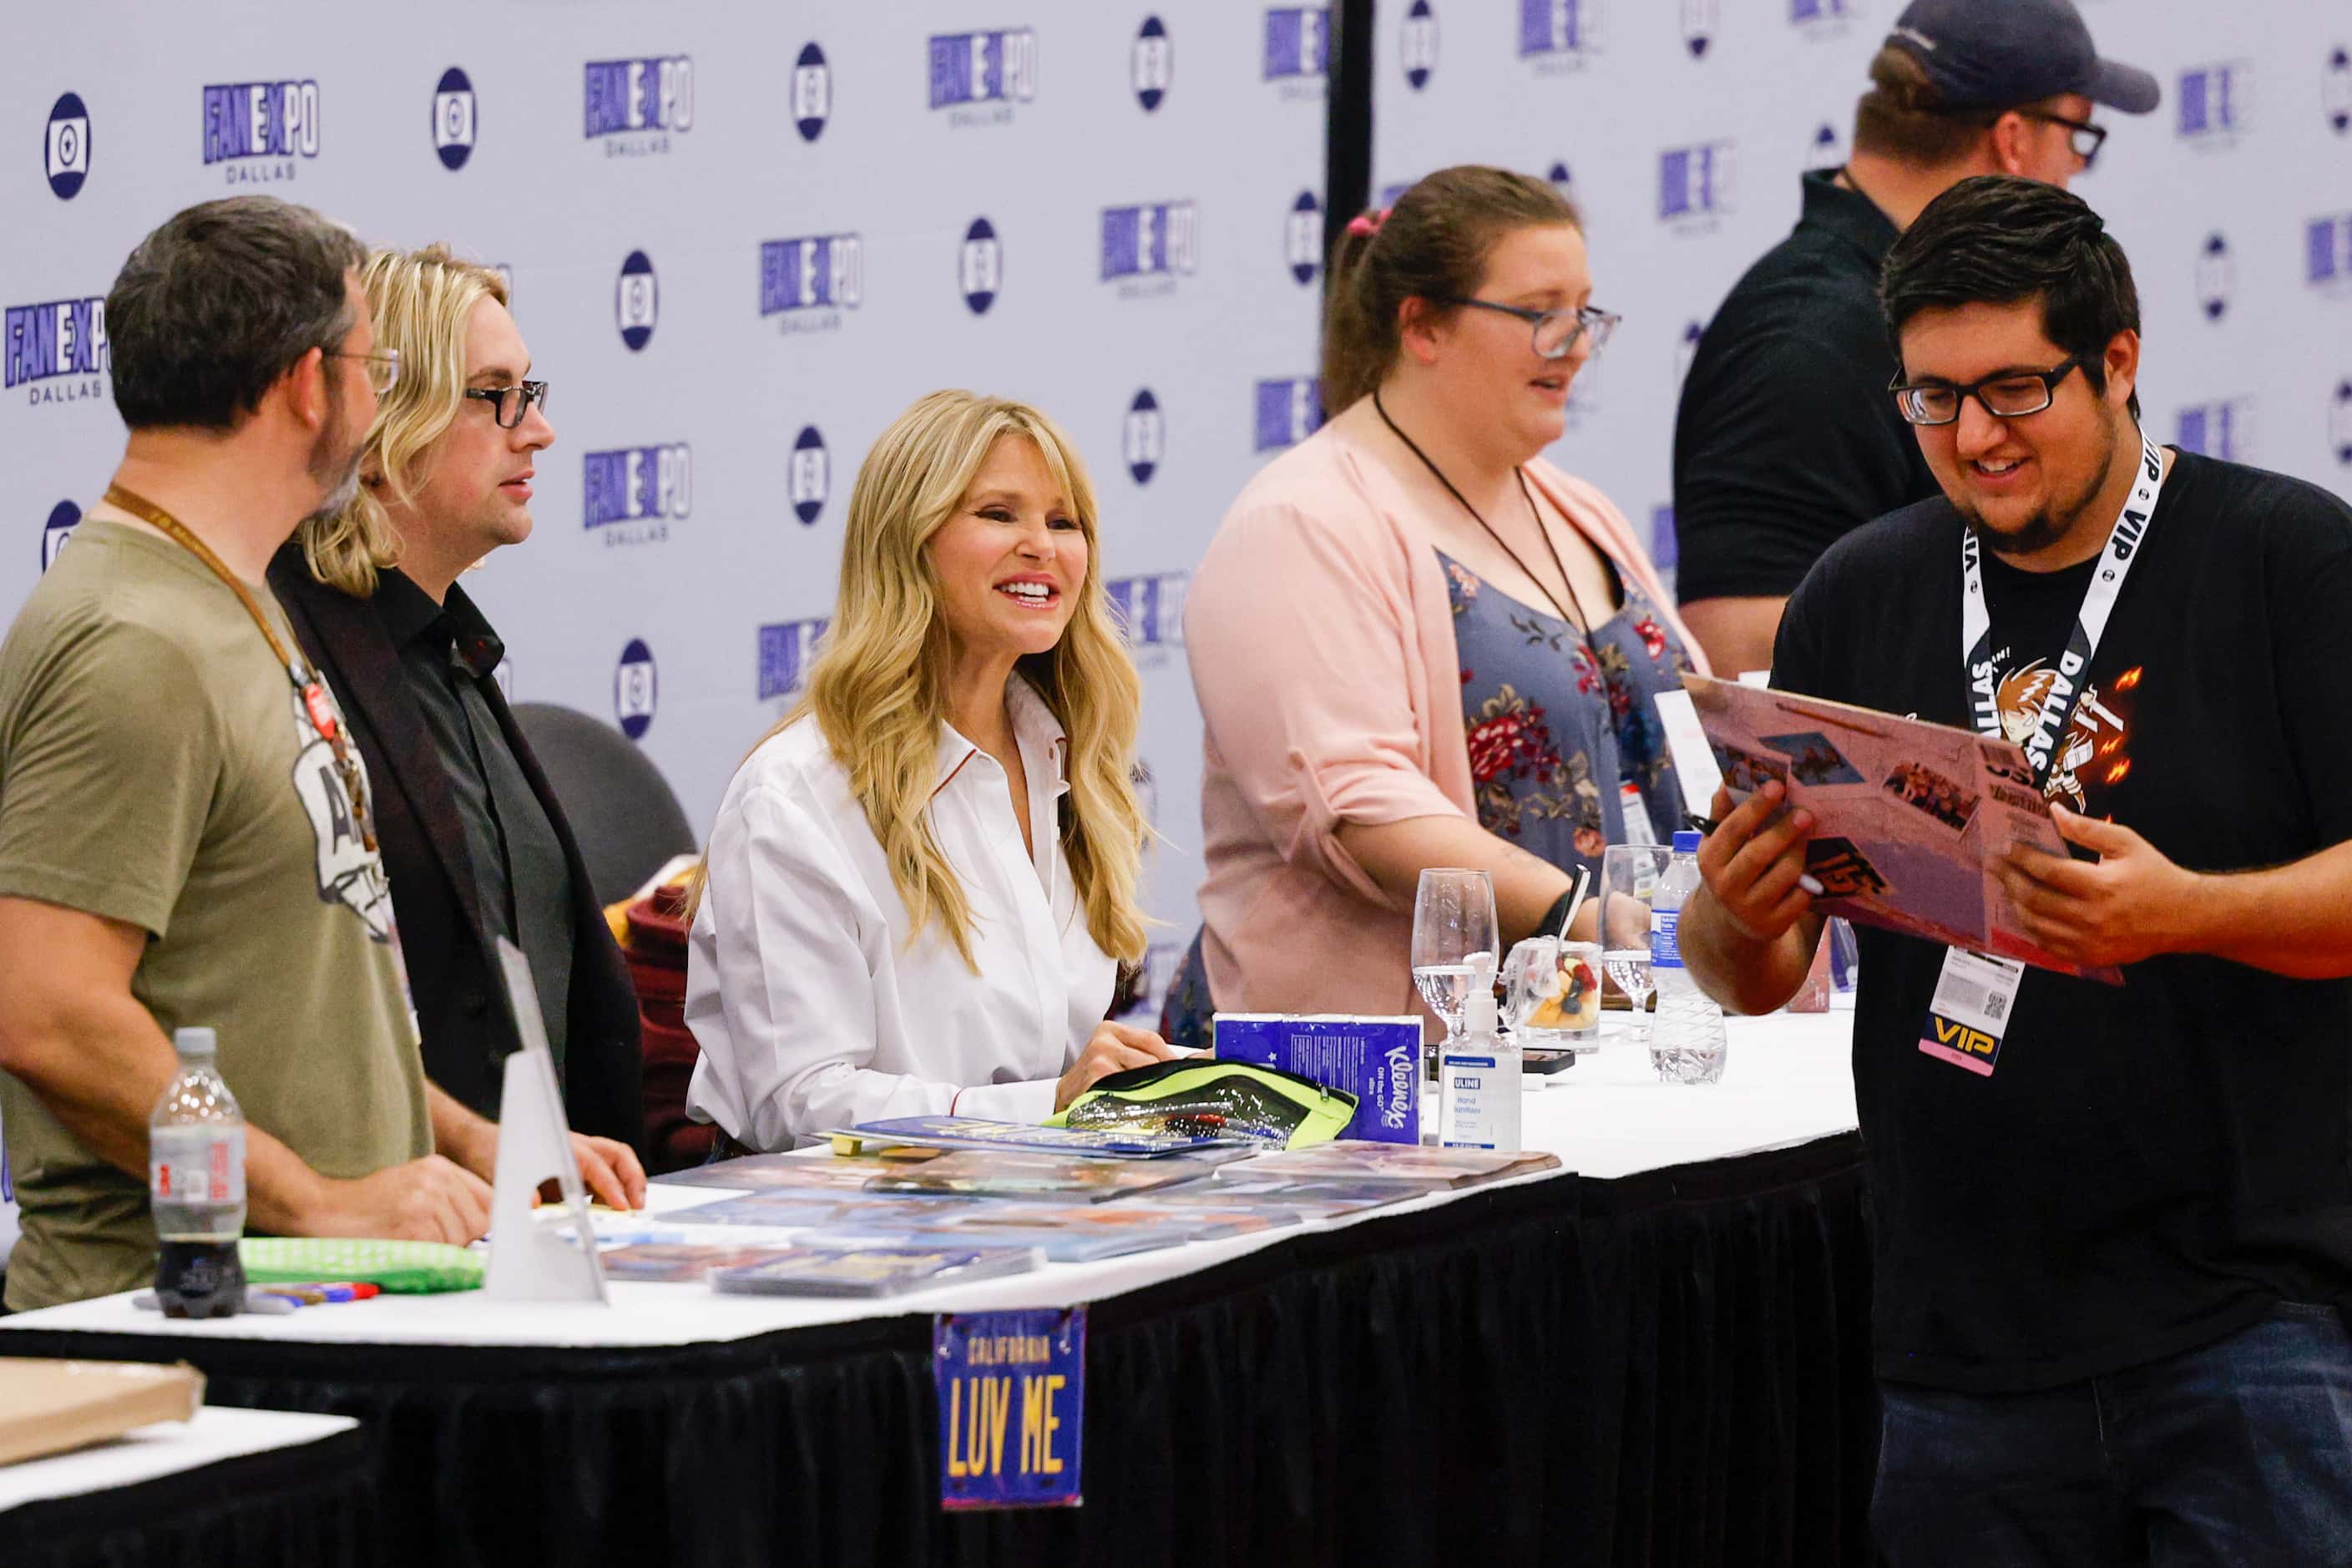 Model and actress Christie Brinkley (center) smiles as she greets fans at Fan Expo Dallas at...